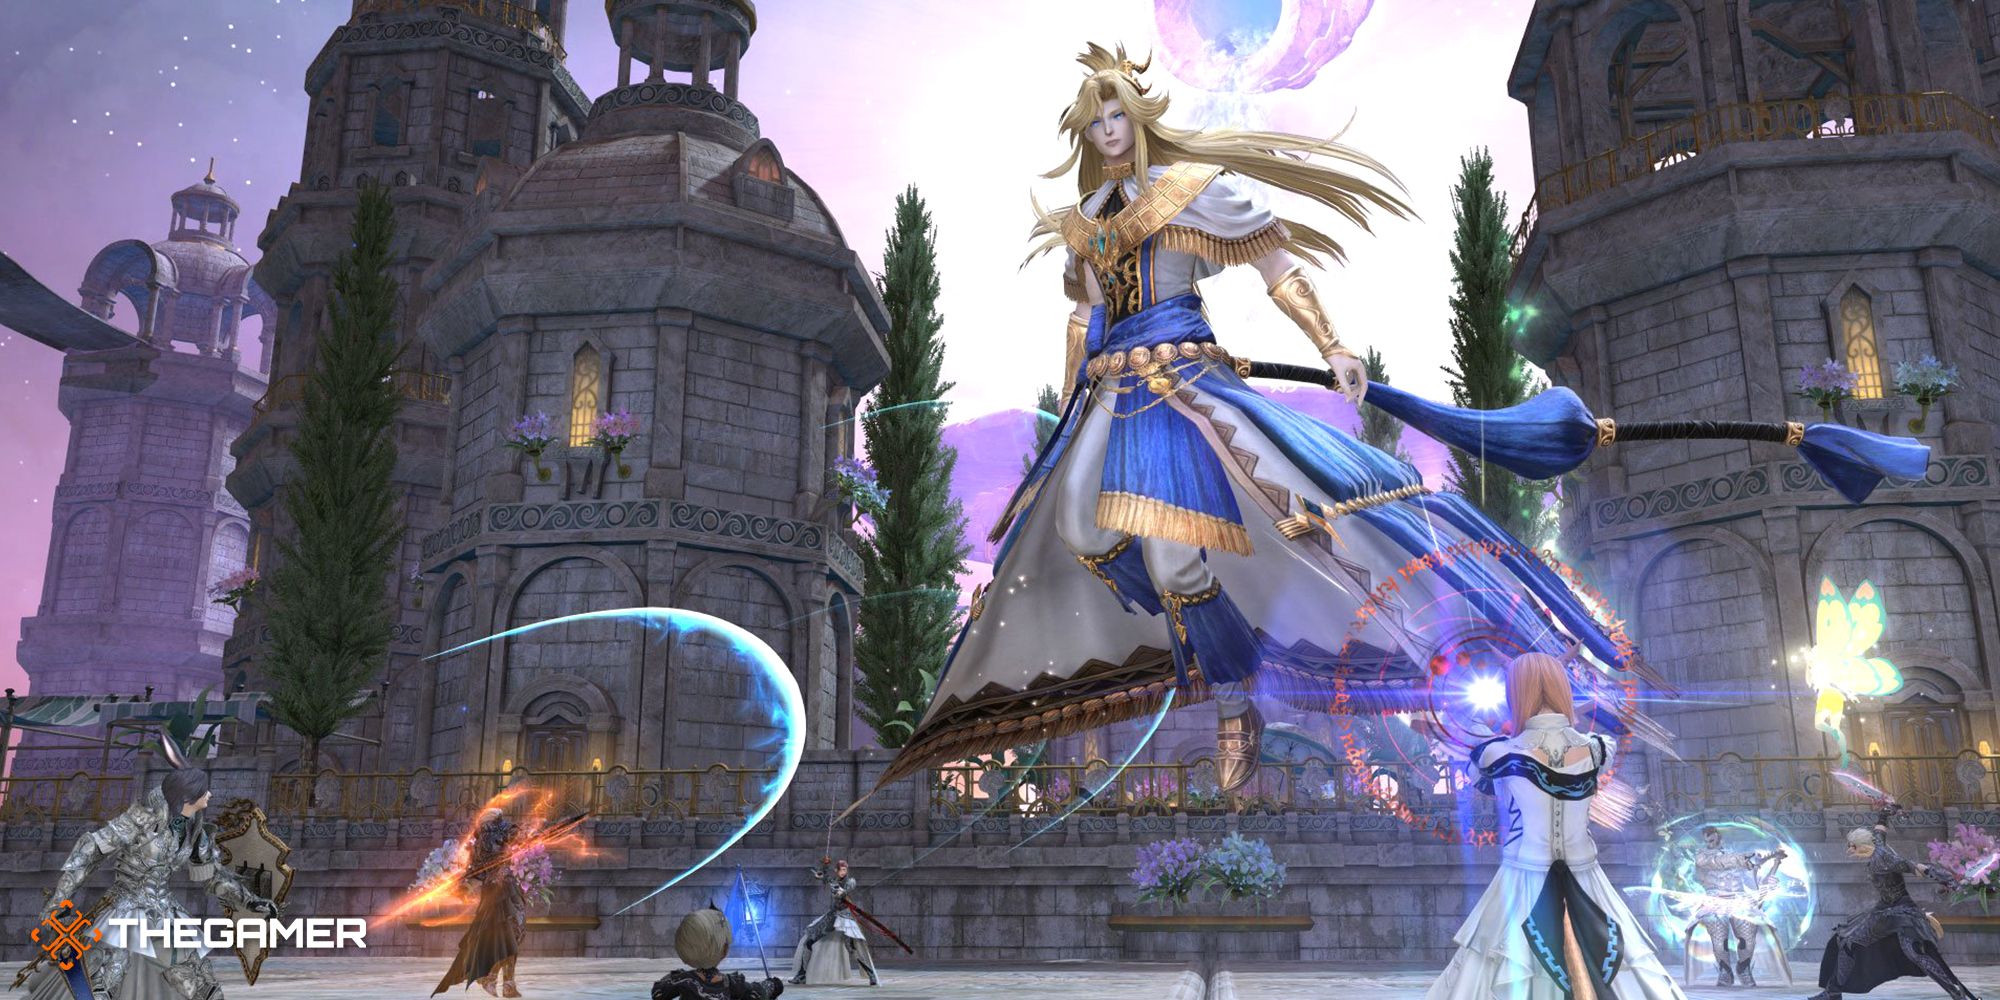 Catapult  'Final Fantasy XIV' Taught Me About Care and Connection